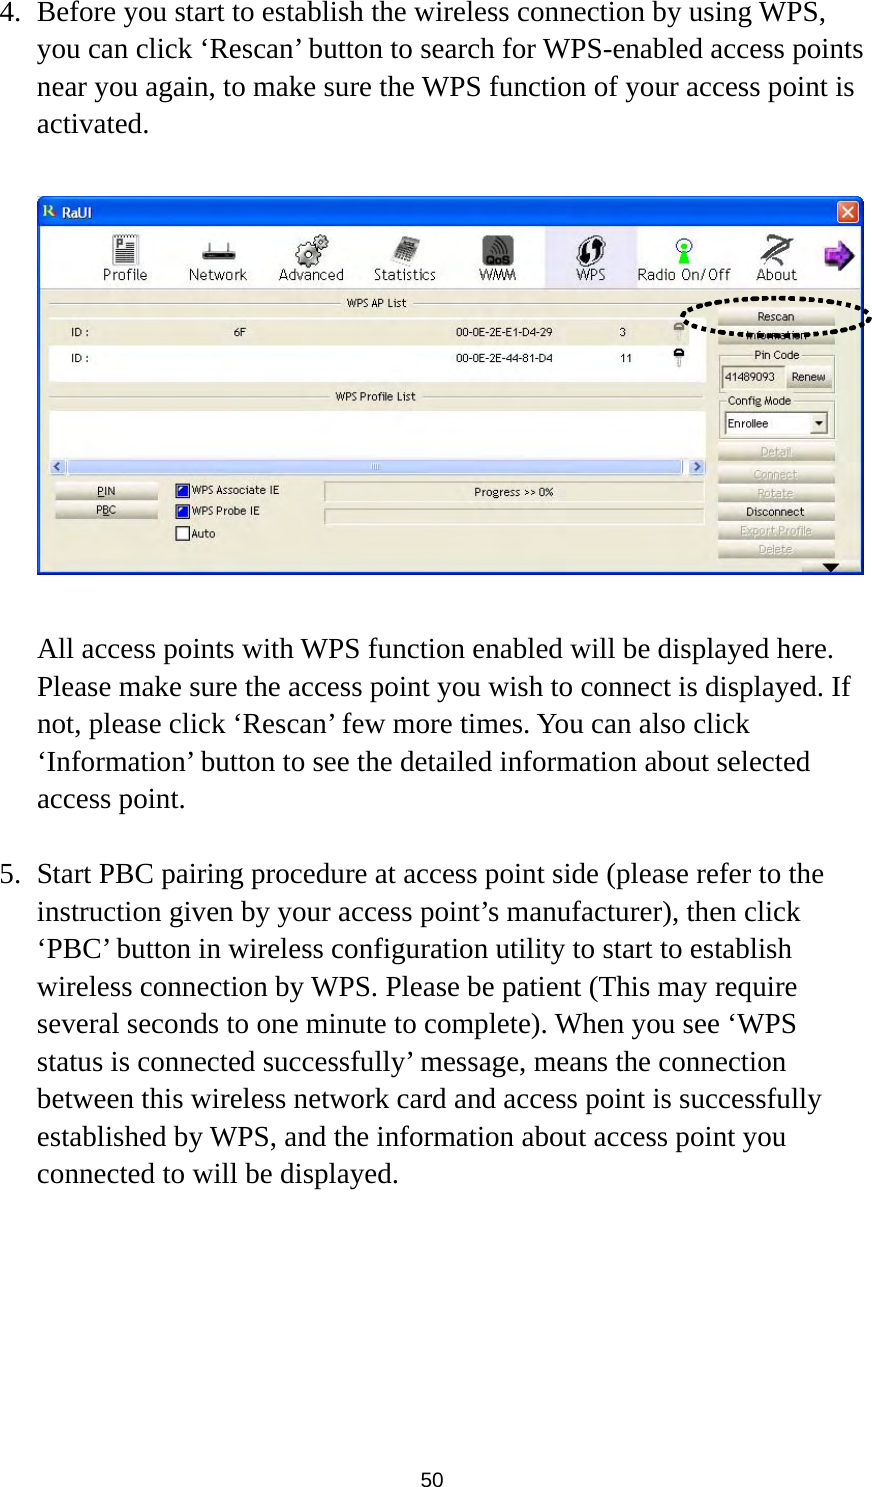  50 4. Before you start to establish the wireless connection by using WPS, you can click ‘Rescan’ button to search for WPS-enabled access points near you again, to make sure the WPS function of your access point is activated.    All access points with WPS function enabled will be displayed here. Please make sure the access point you wish to connect is displayed. If not, please click ‘Rescan’ few more times. You can also click ‘Information’ button to see the detailed information about selected access point.  5. Start PBC pairing procedure at access point side (please refer to the instruction given by your access point’s manufacturer), then click ‘PBC’ button in wireless configuration utility to start to establish wireless connection by WPS. Please be patient (This may require several seconds to one minute to complete). When you see ‘WPS status is connected successfully’ message, means the connection between this wireless network card and access point is successfully established by WPS, and the information about access point you connected to will be displayed.       